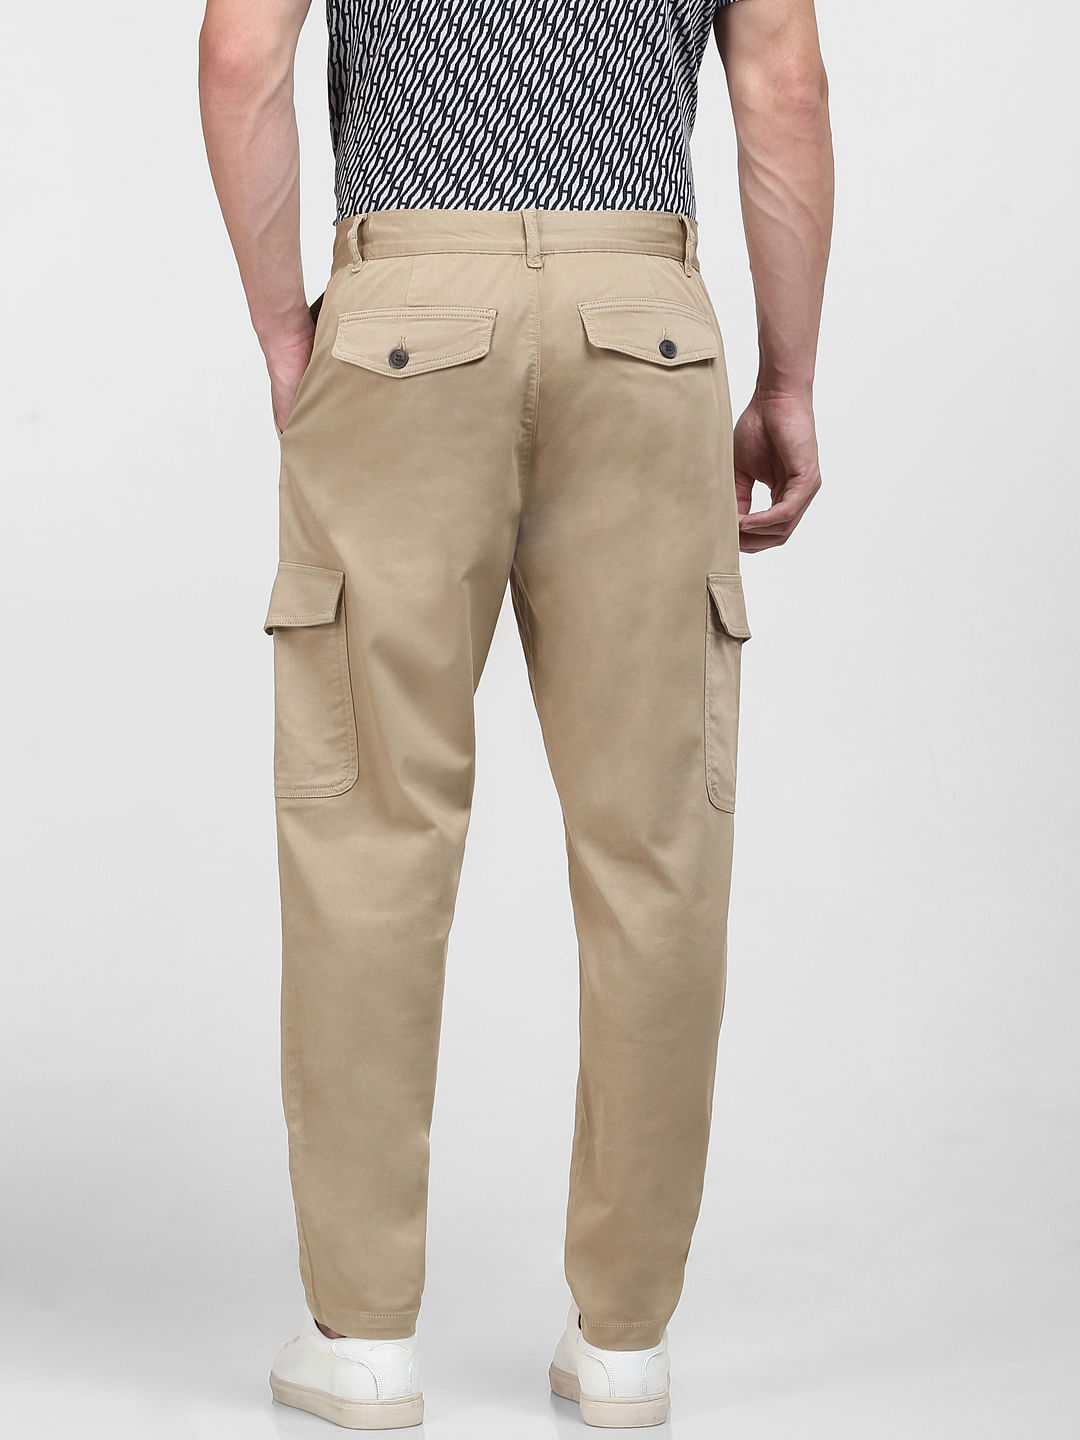 Buy U.S. POLO ASSN. Men's Casual Trousers at Amazon.in